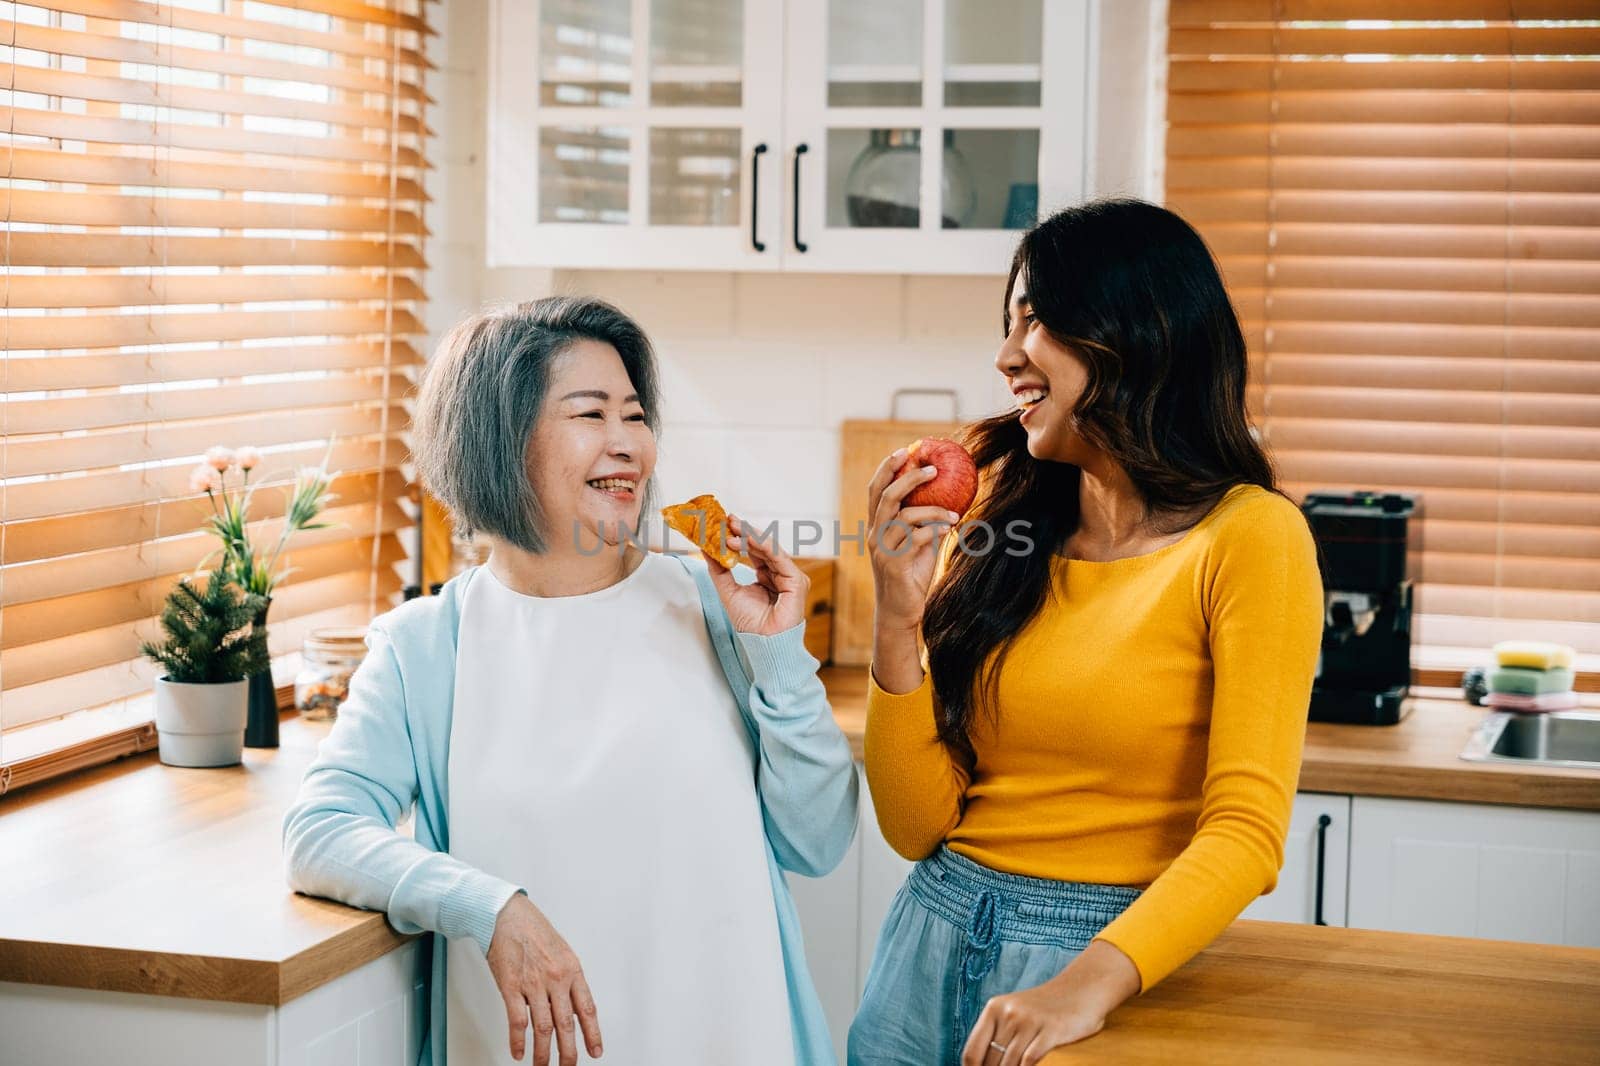 At home, an old mother and her daughter, a young woman, share quality time in the kitchen. The daughter is assisting her mother, creating a heartwarming portrait of family togetherness and care. by Sorapop